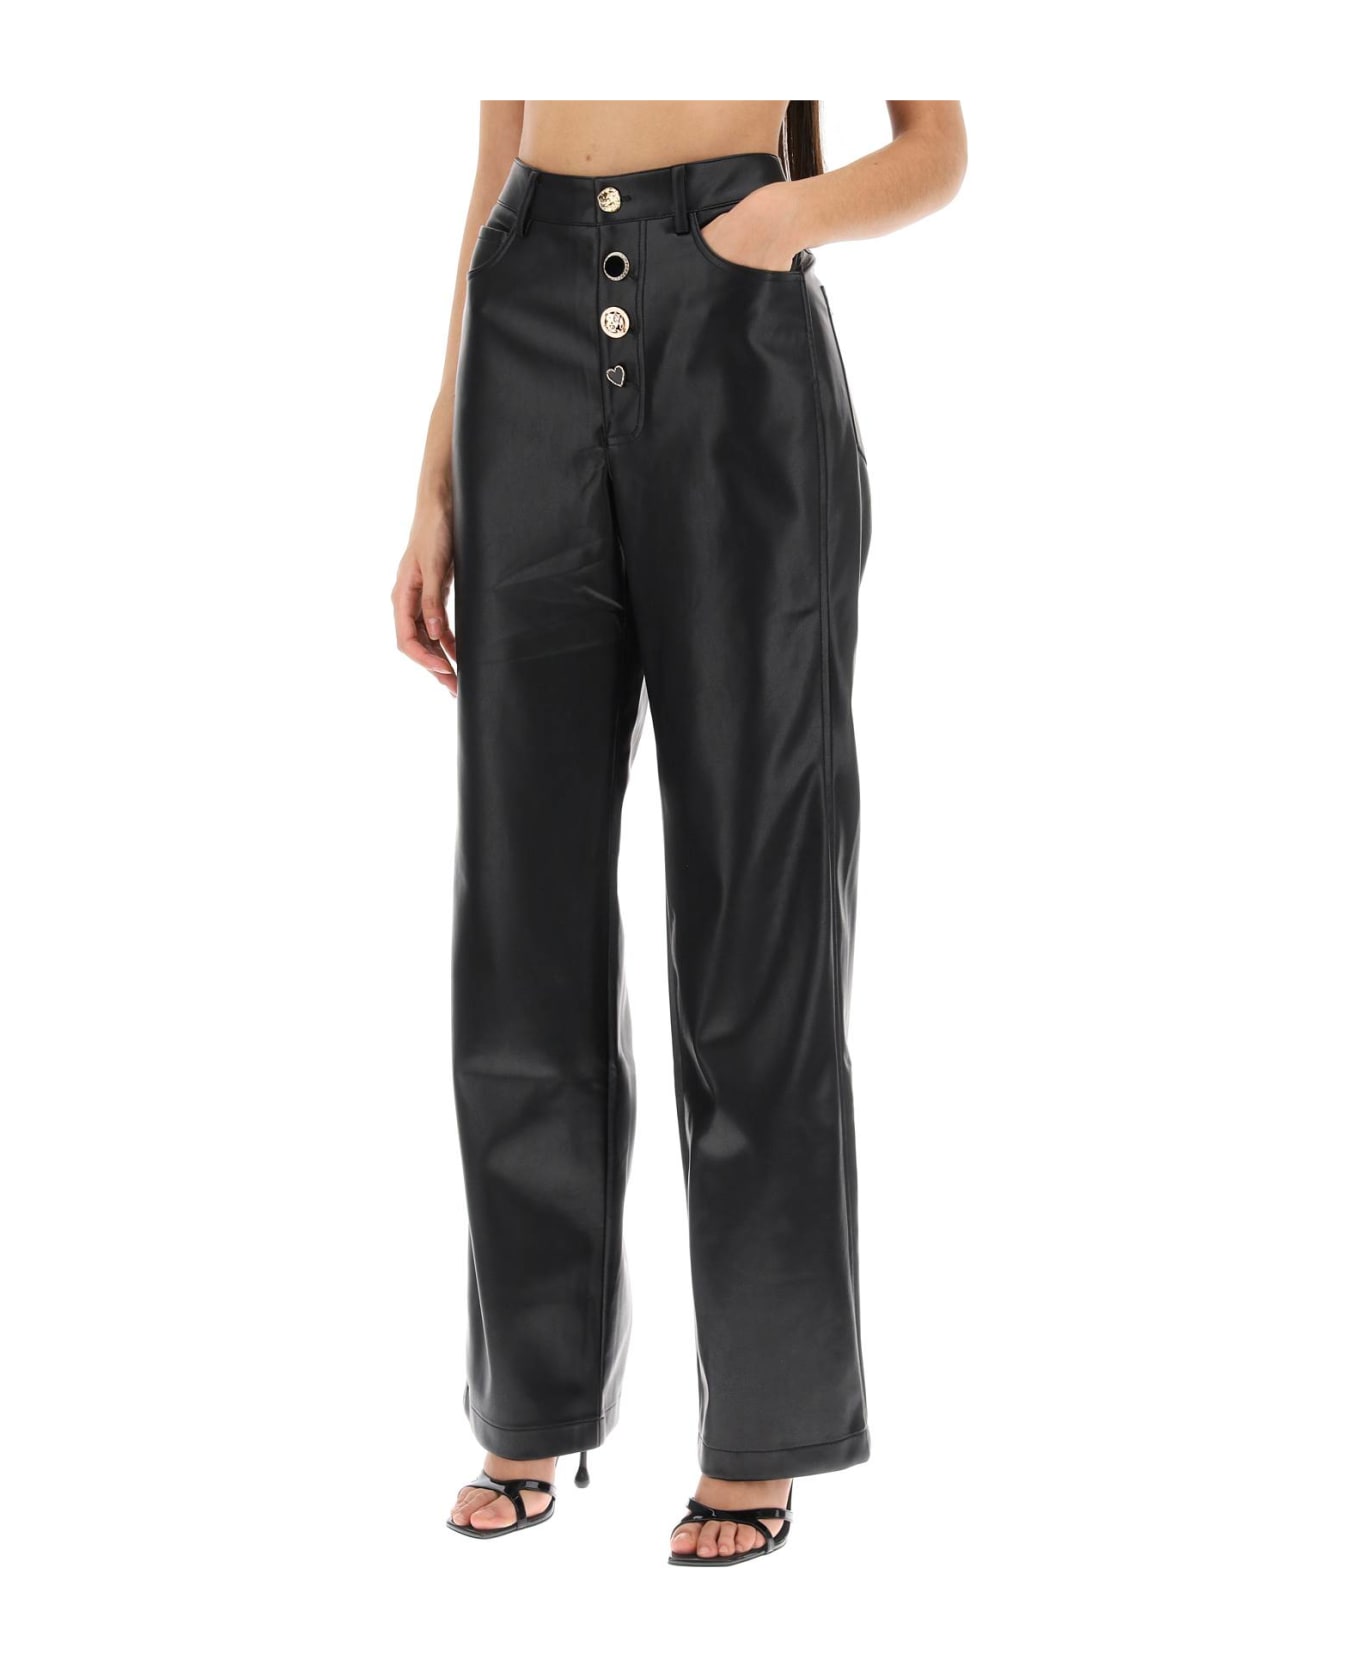 Rotate by Birger Christensen Embellished Button Faux Leather Pants - BLACK (Black)